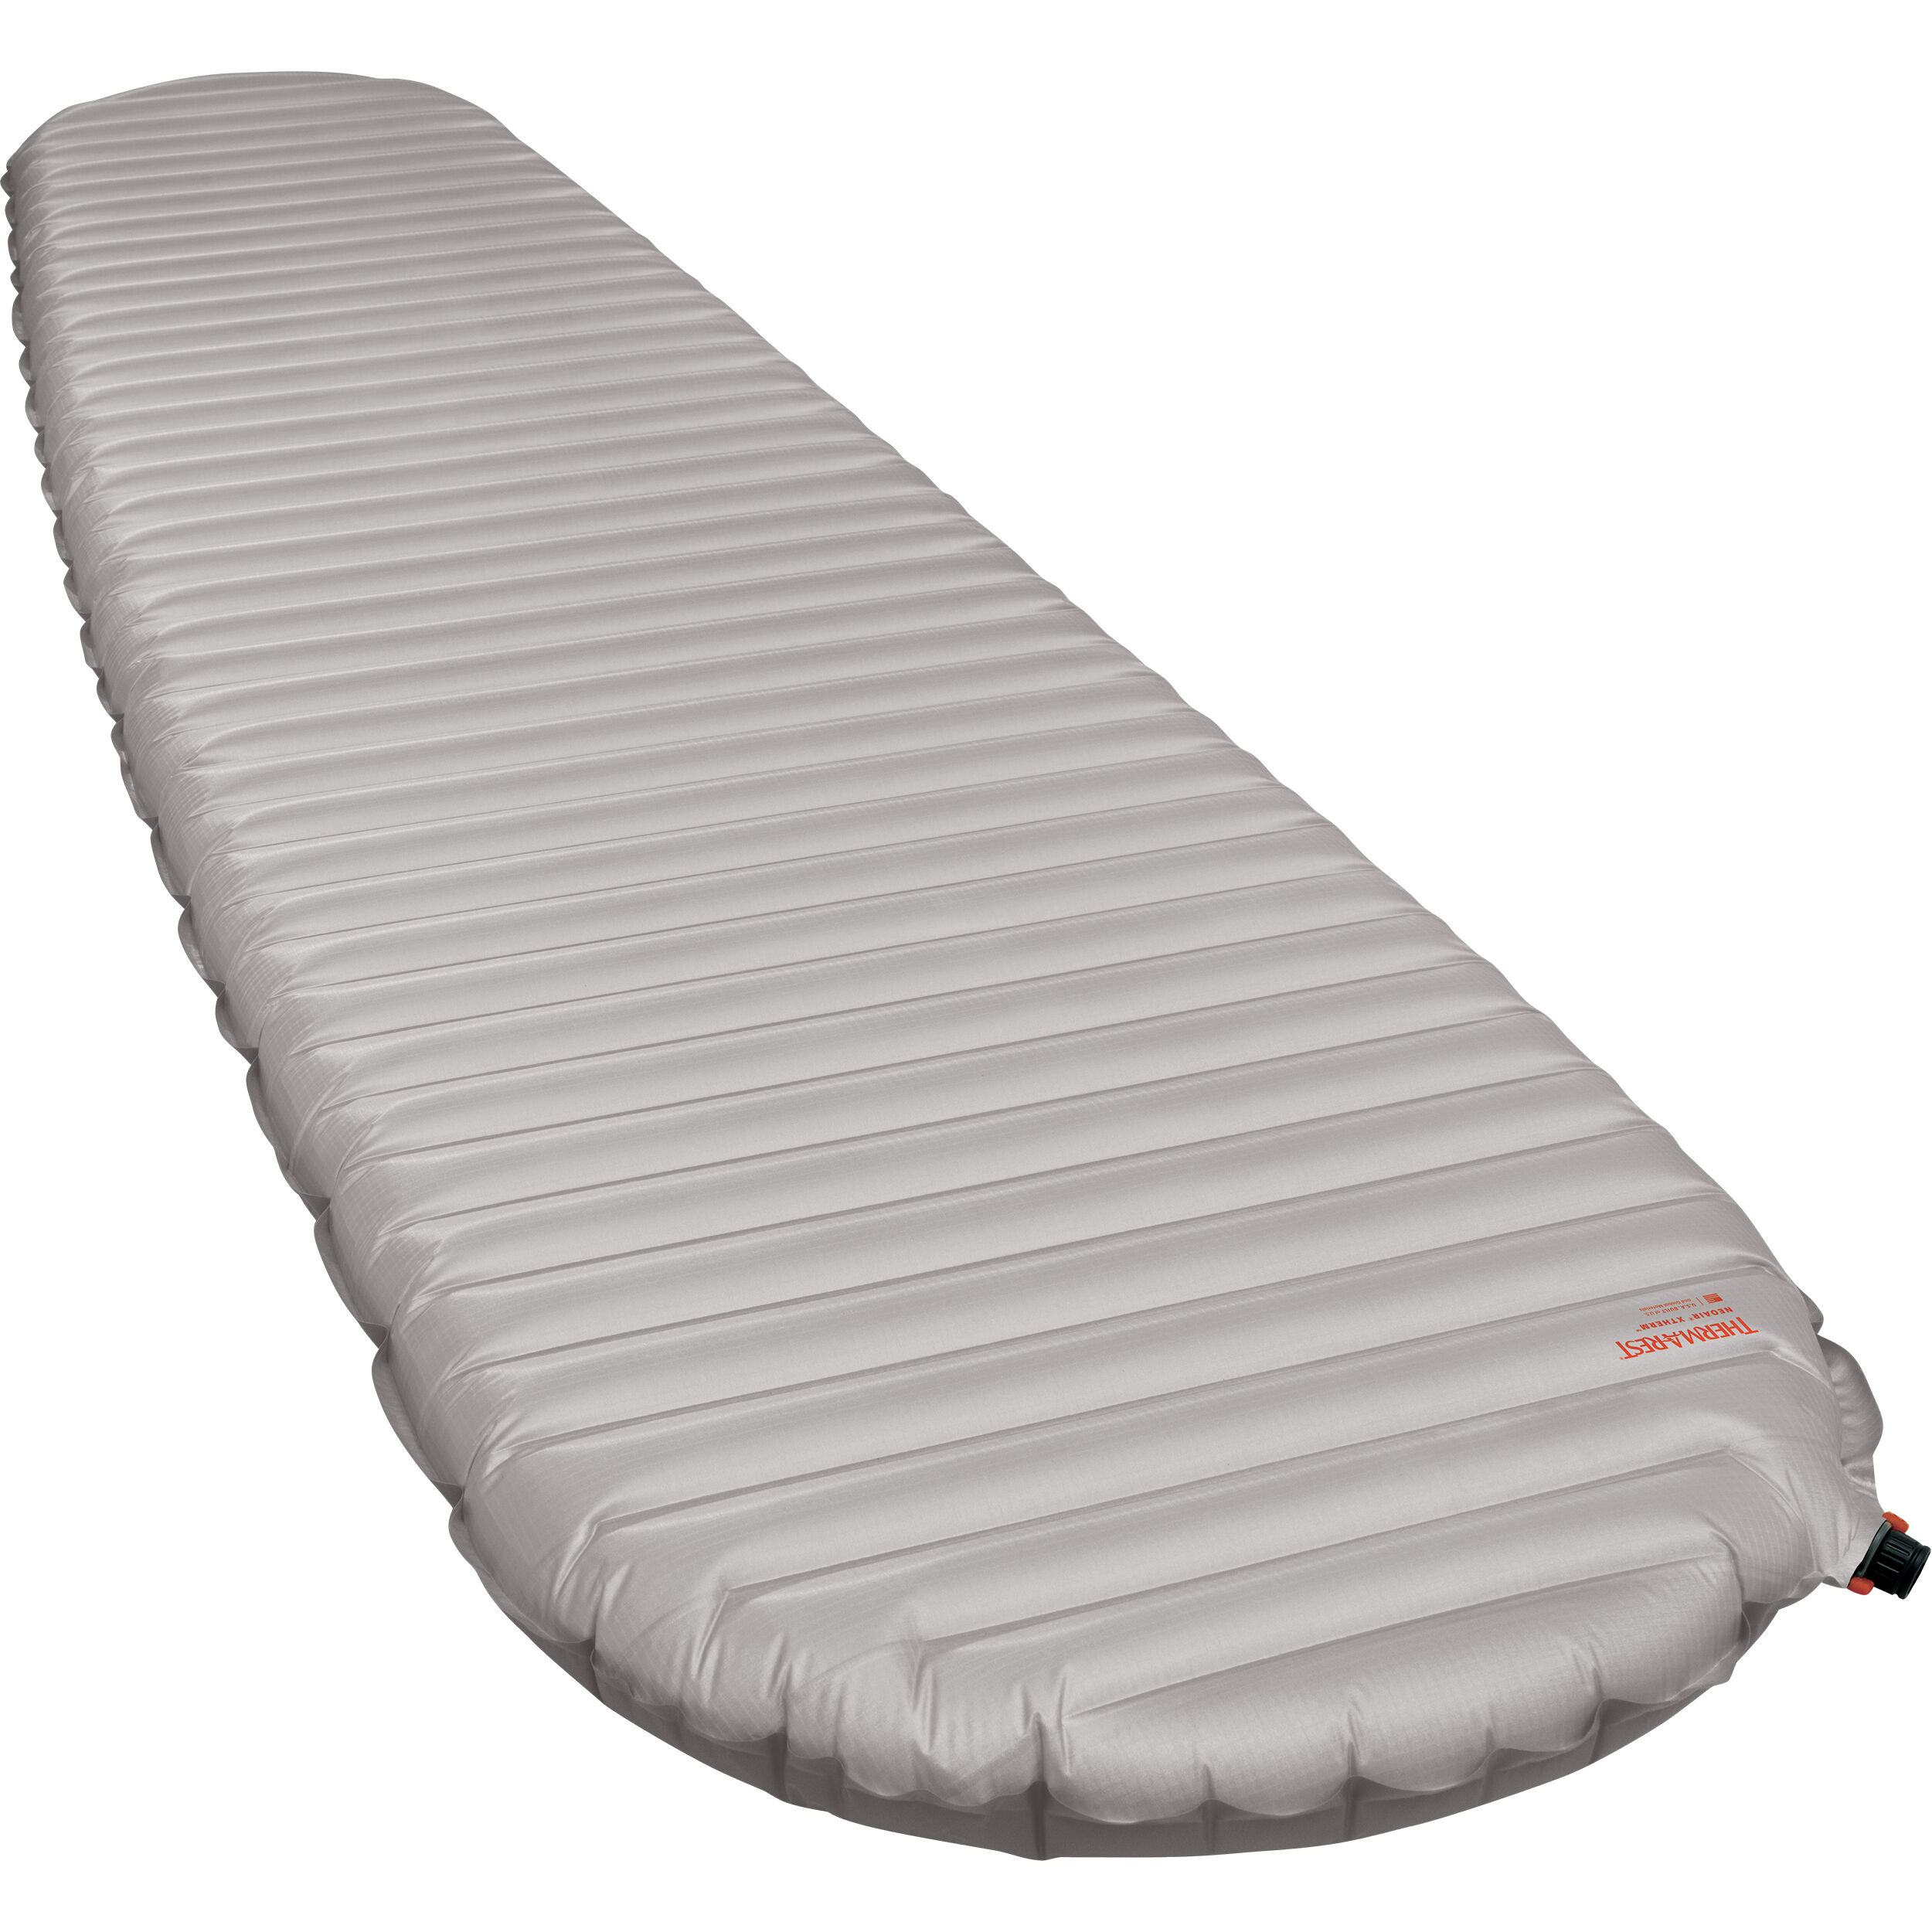 neoair - search results | Therm-a-Rest